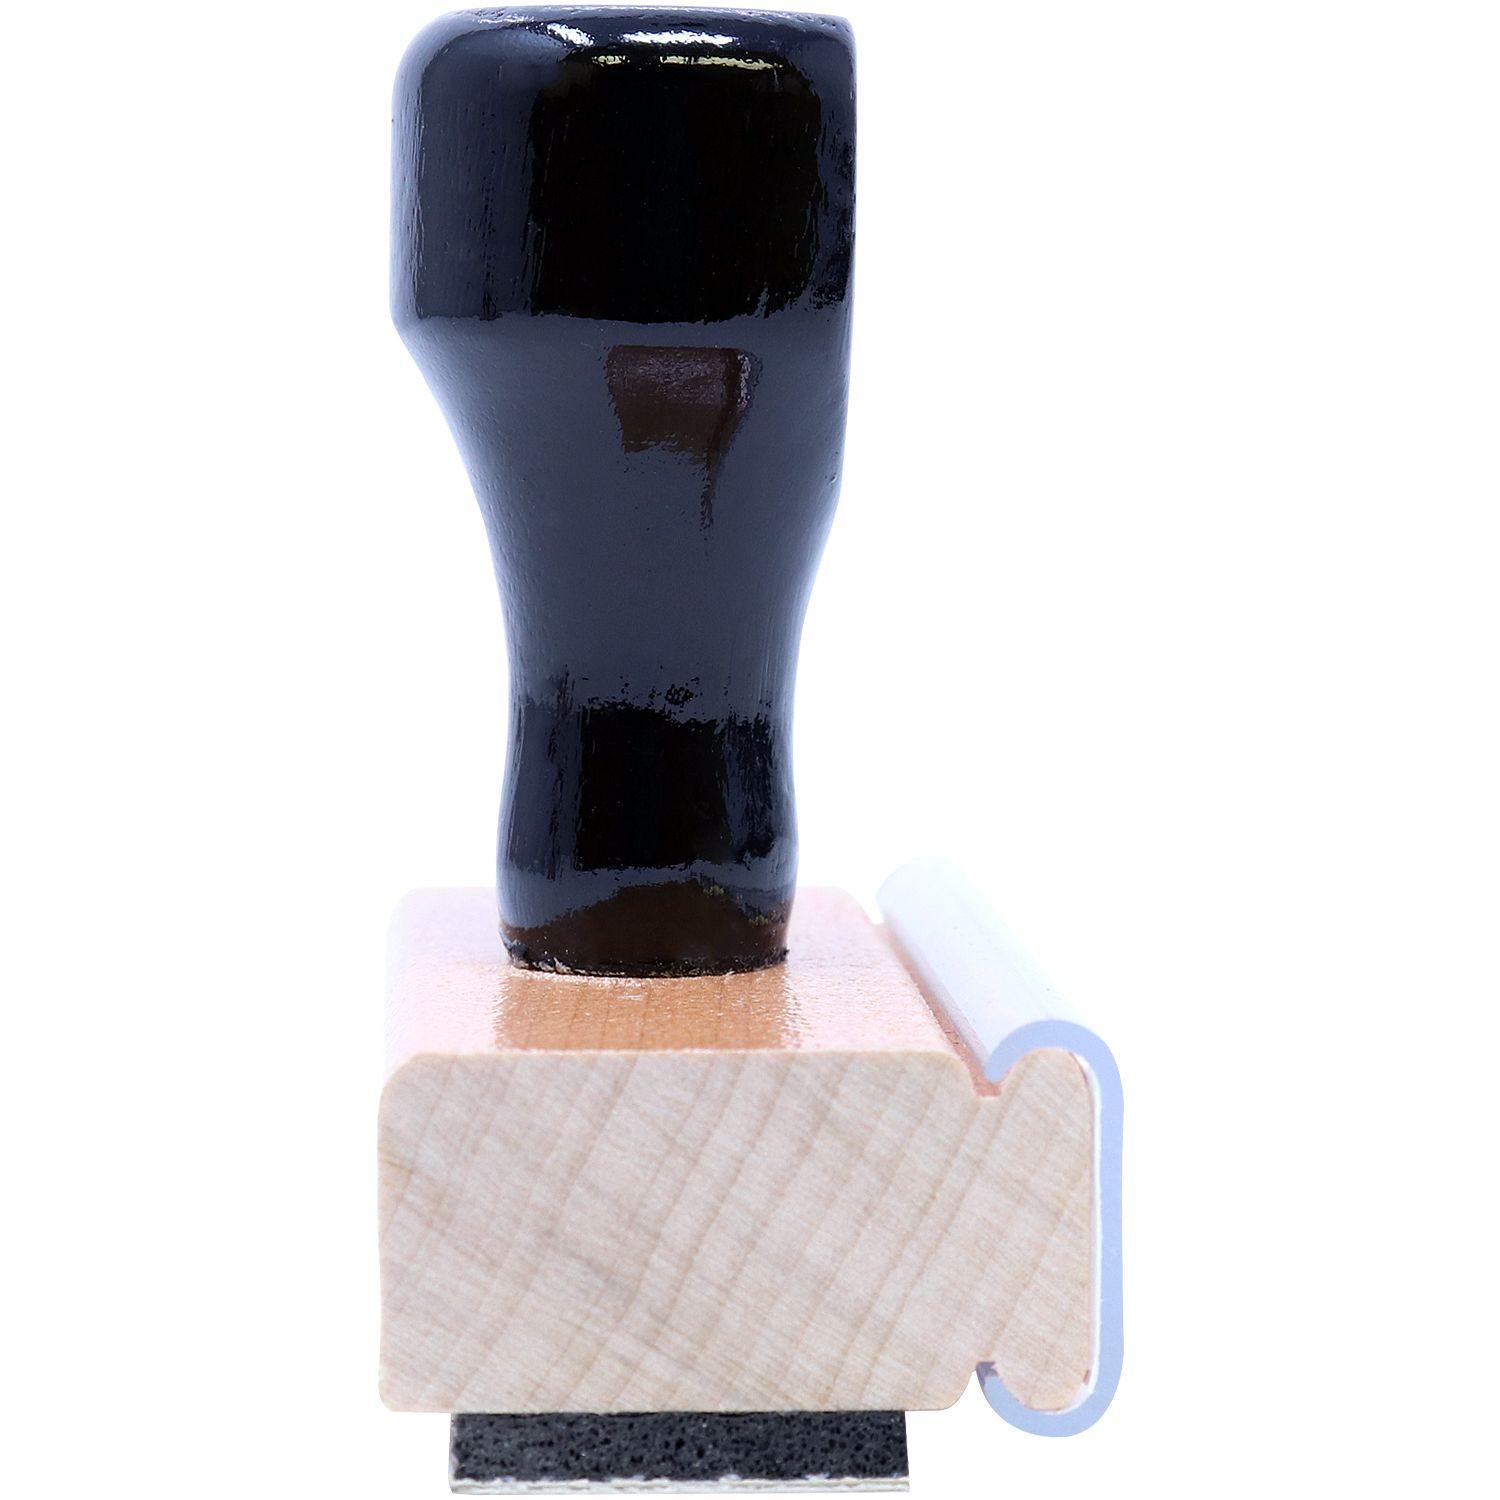 Narrow Expedite Rubber Stamp - Engineer Seal Stamps - Brand_Acorn, Impression Size_Small, Stamp Type_Regular Stamp, Type of Use_Postal & Mailing, Type of Use_Shipping & Receiving